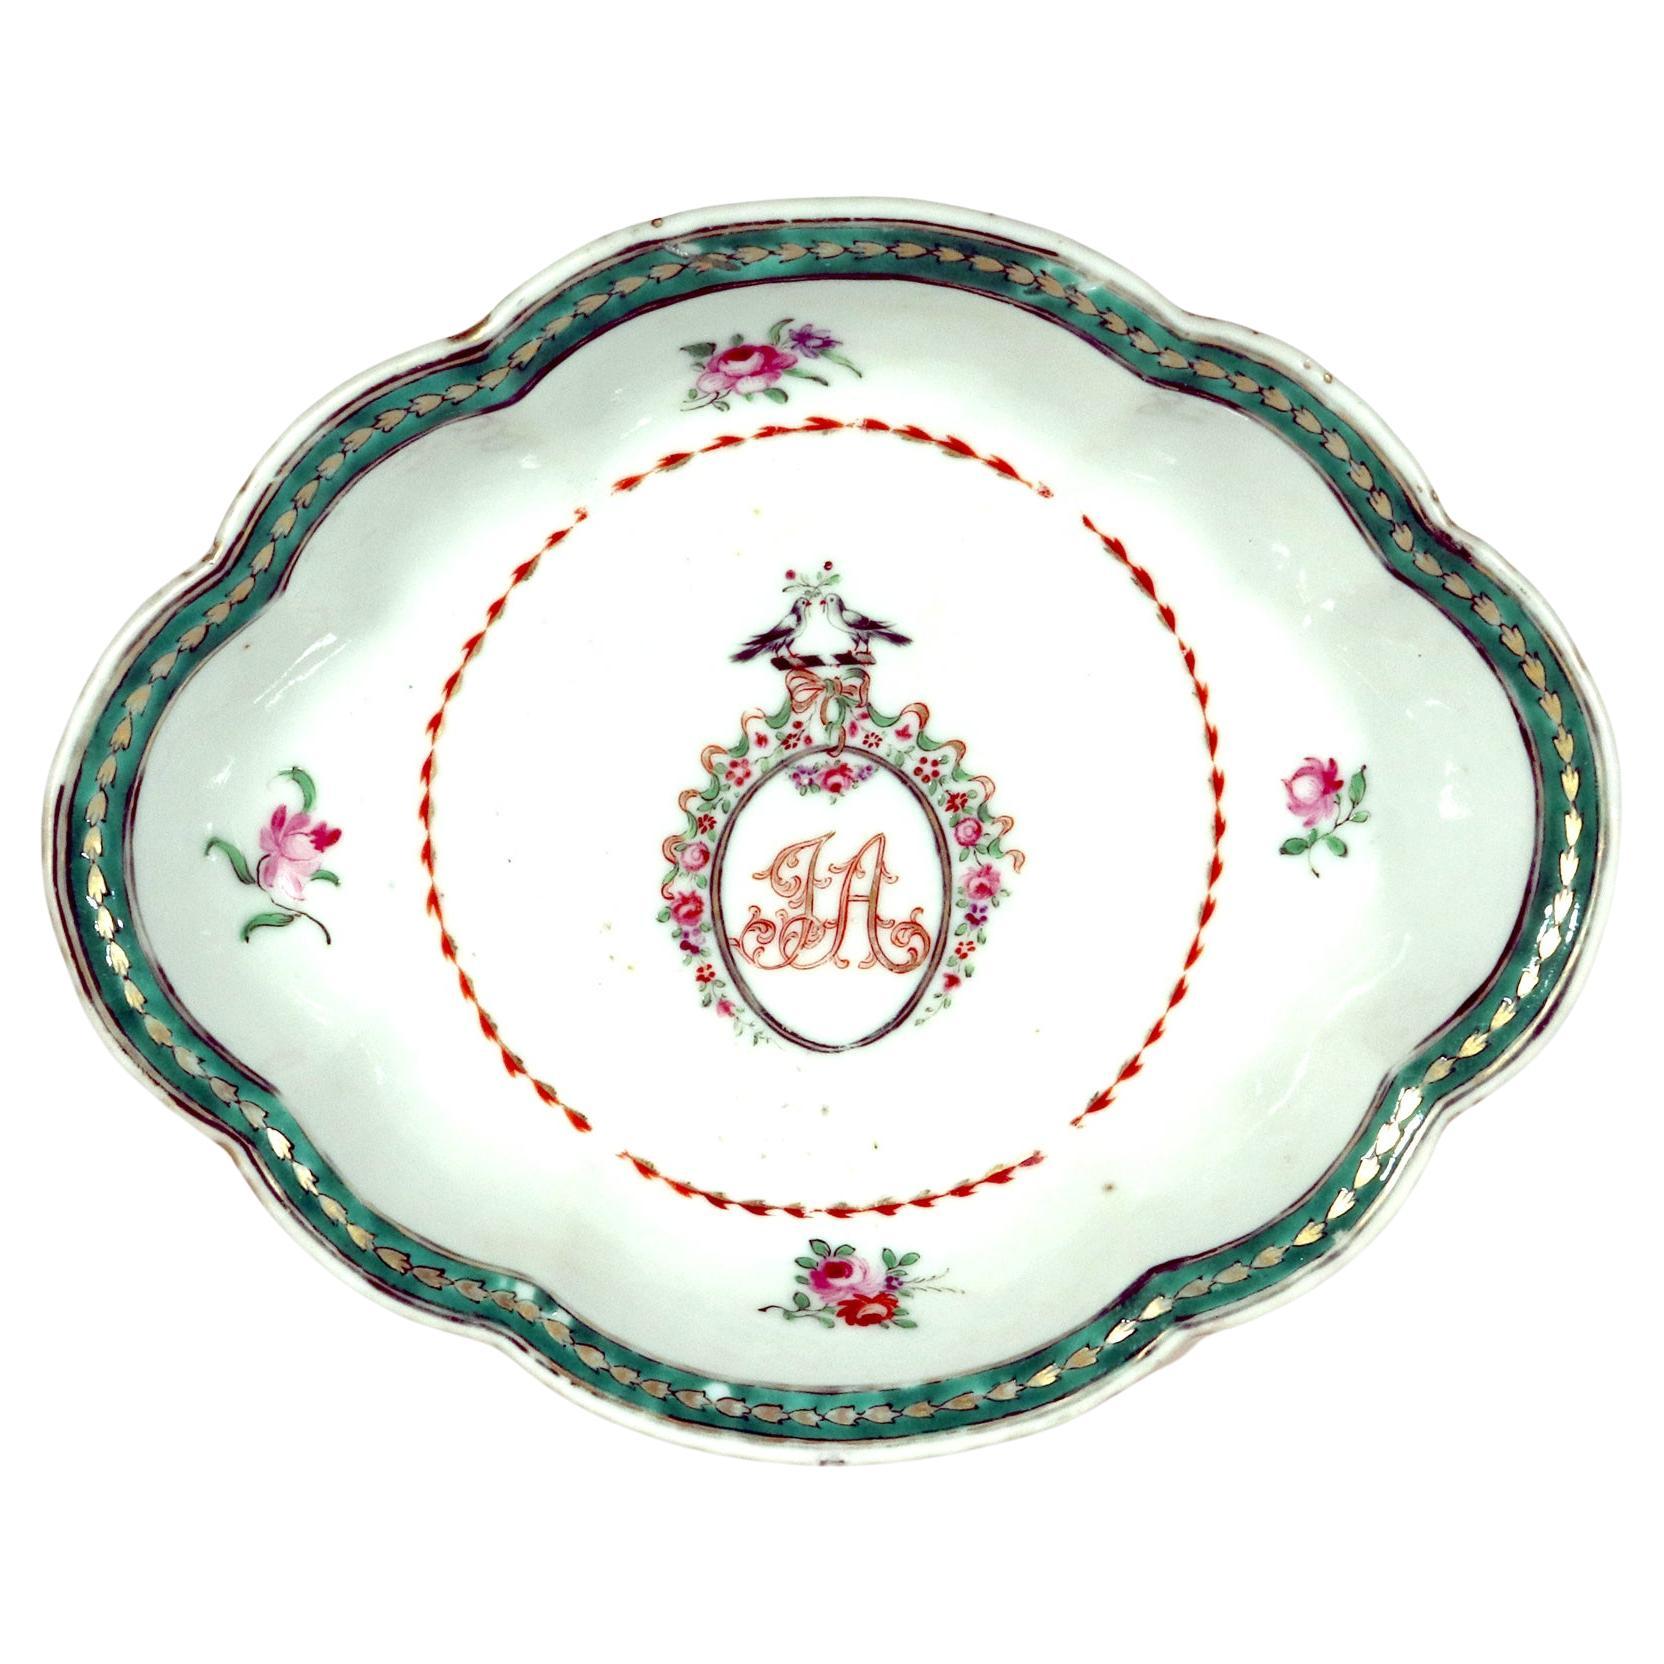 Chinese Export Porcelain Deep Dish with "JA" Cypher For Sale